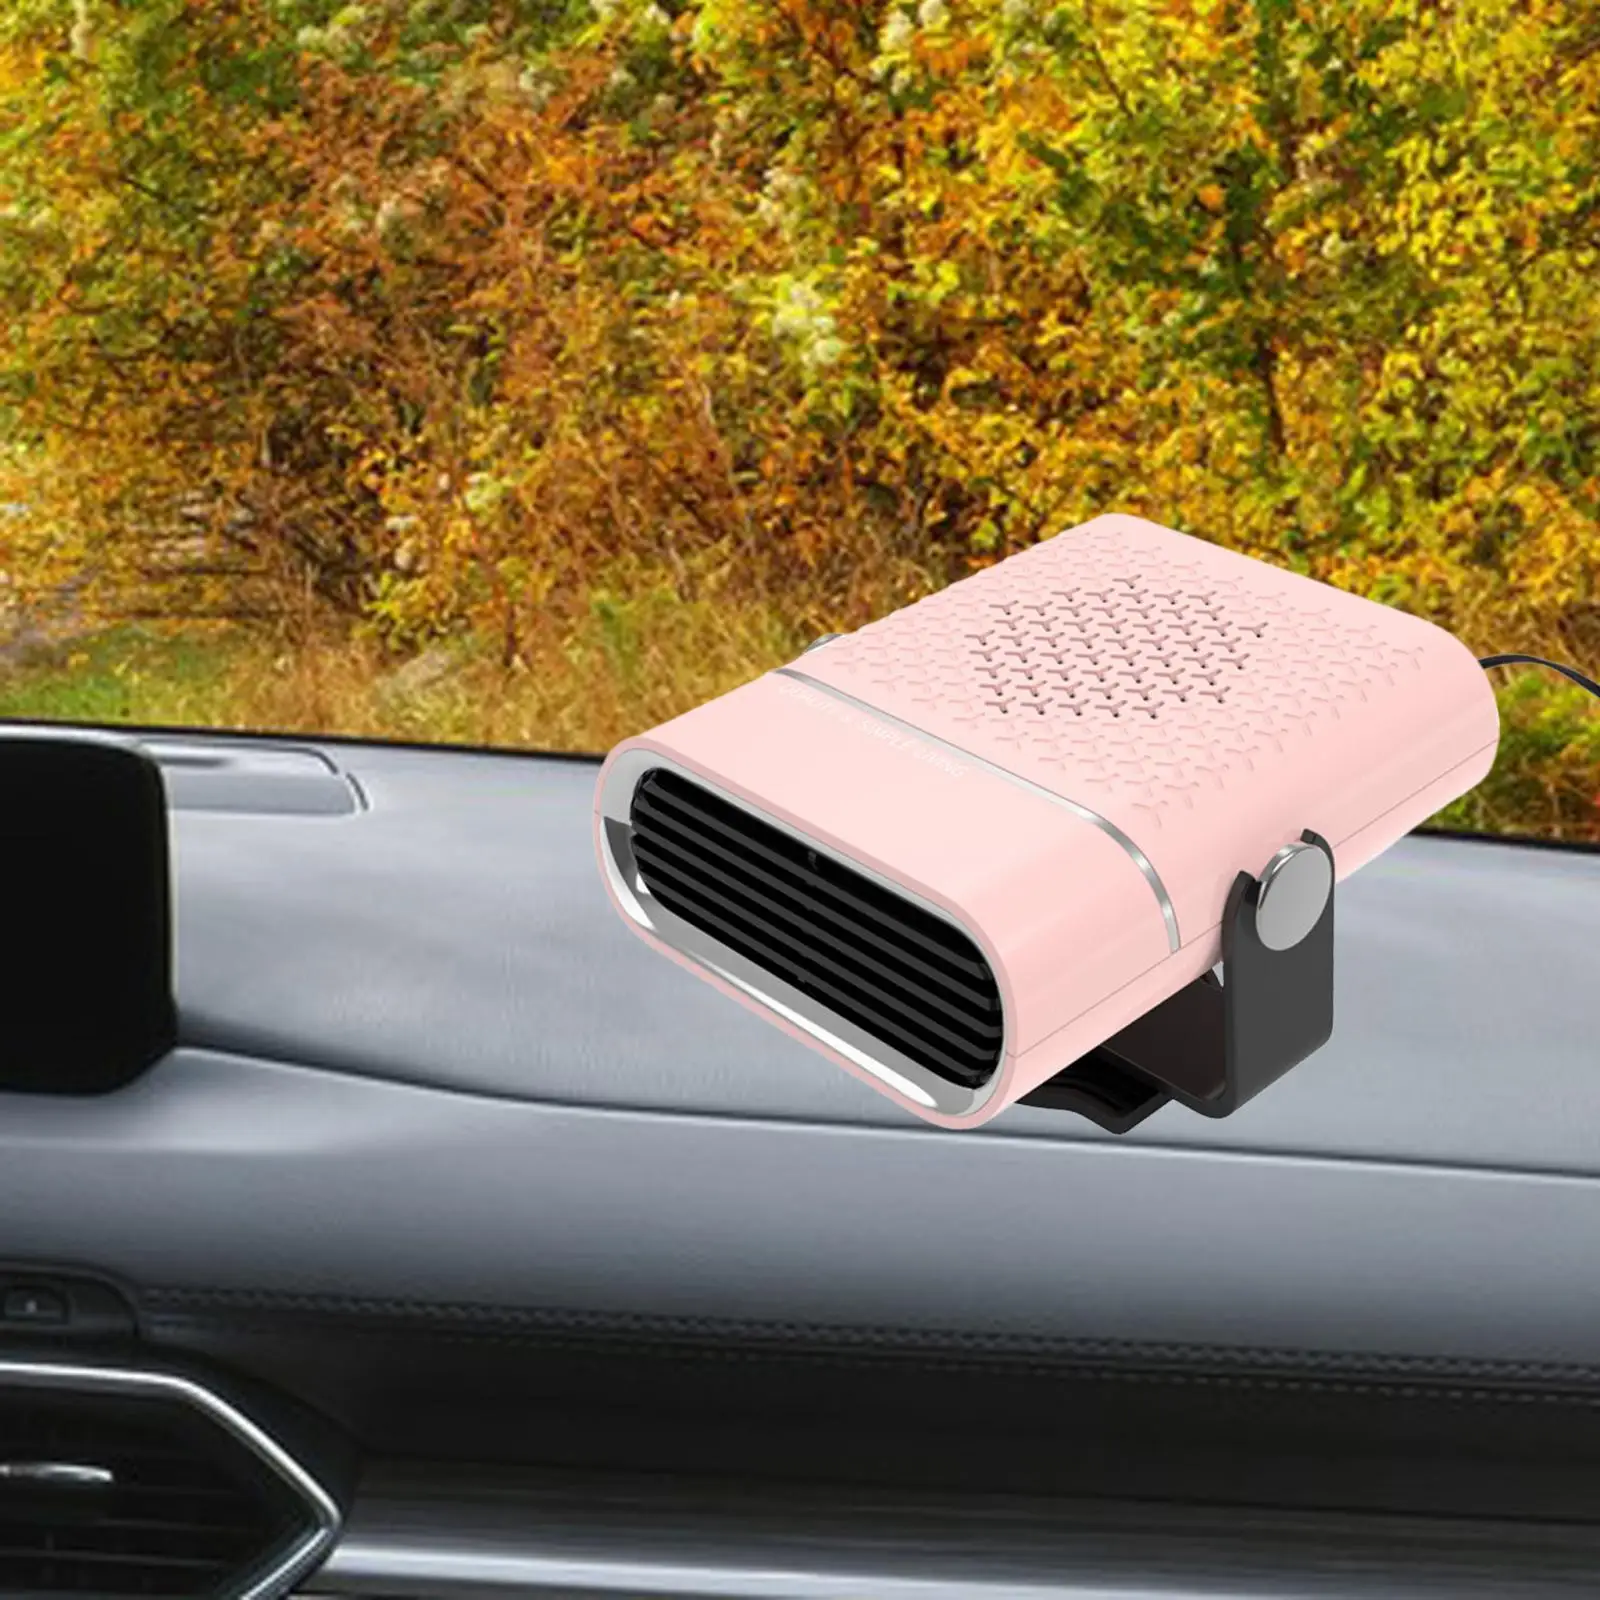 Car Heater for Winter Compact Windshield Defroster Demister Plug into Cigarette Lighter 260W Car Fan Heater Auto Vehicle Heater